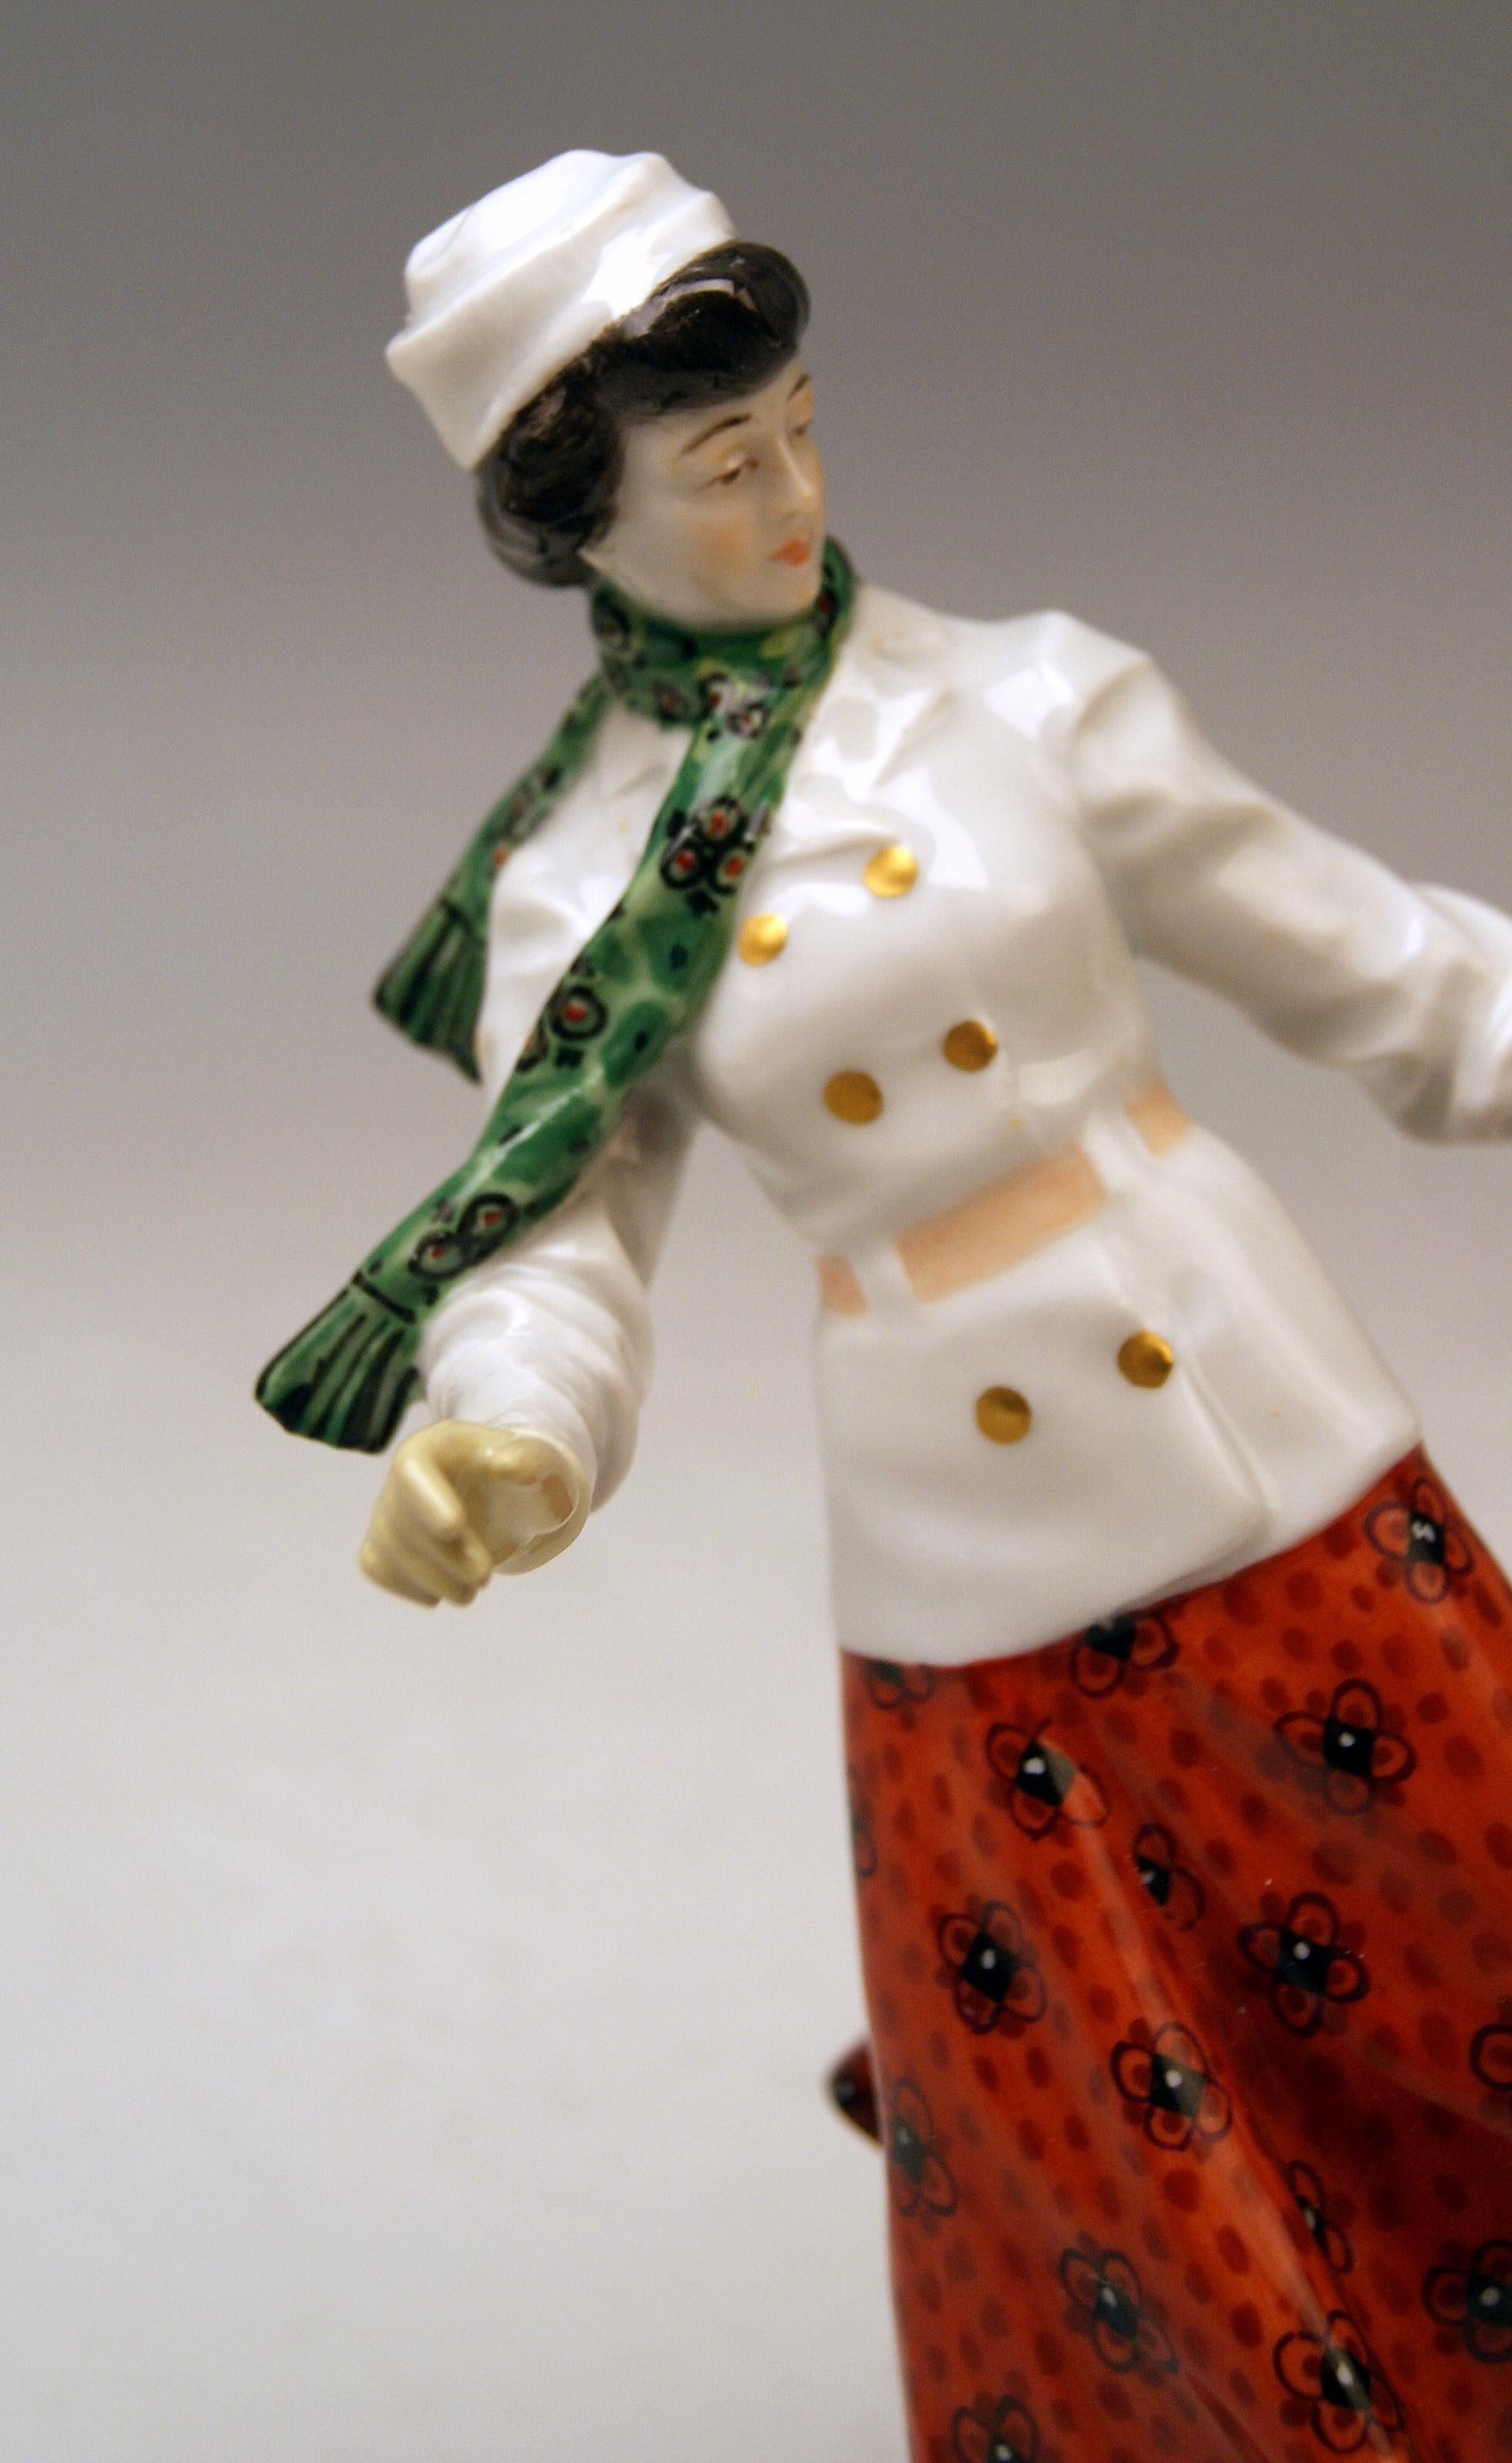 Early 20th Century Meissen Art Nouveau Lady Ice Skating Model Z 194 by Alfred Koenig, circa 1912